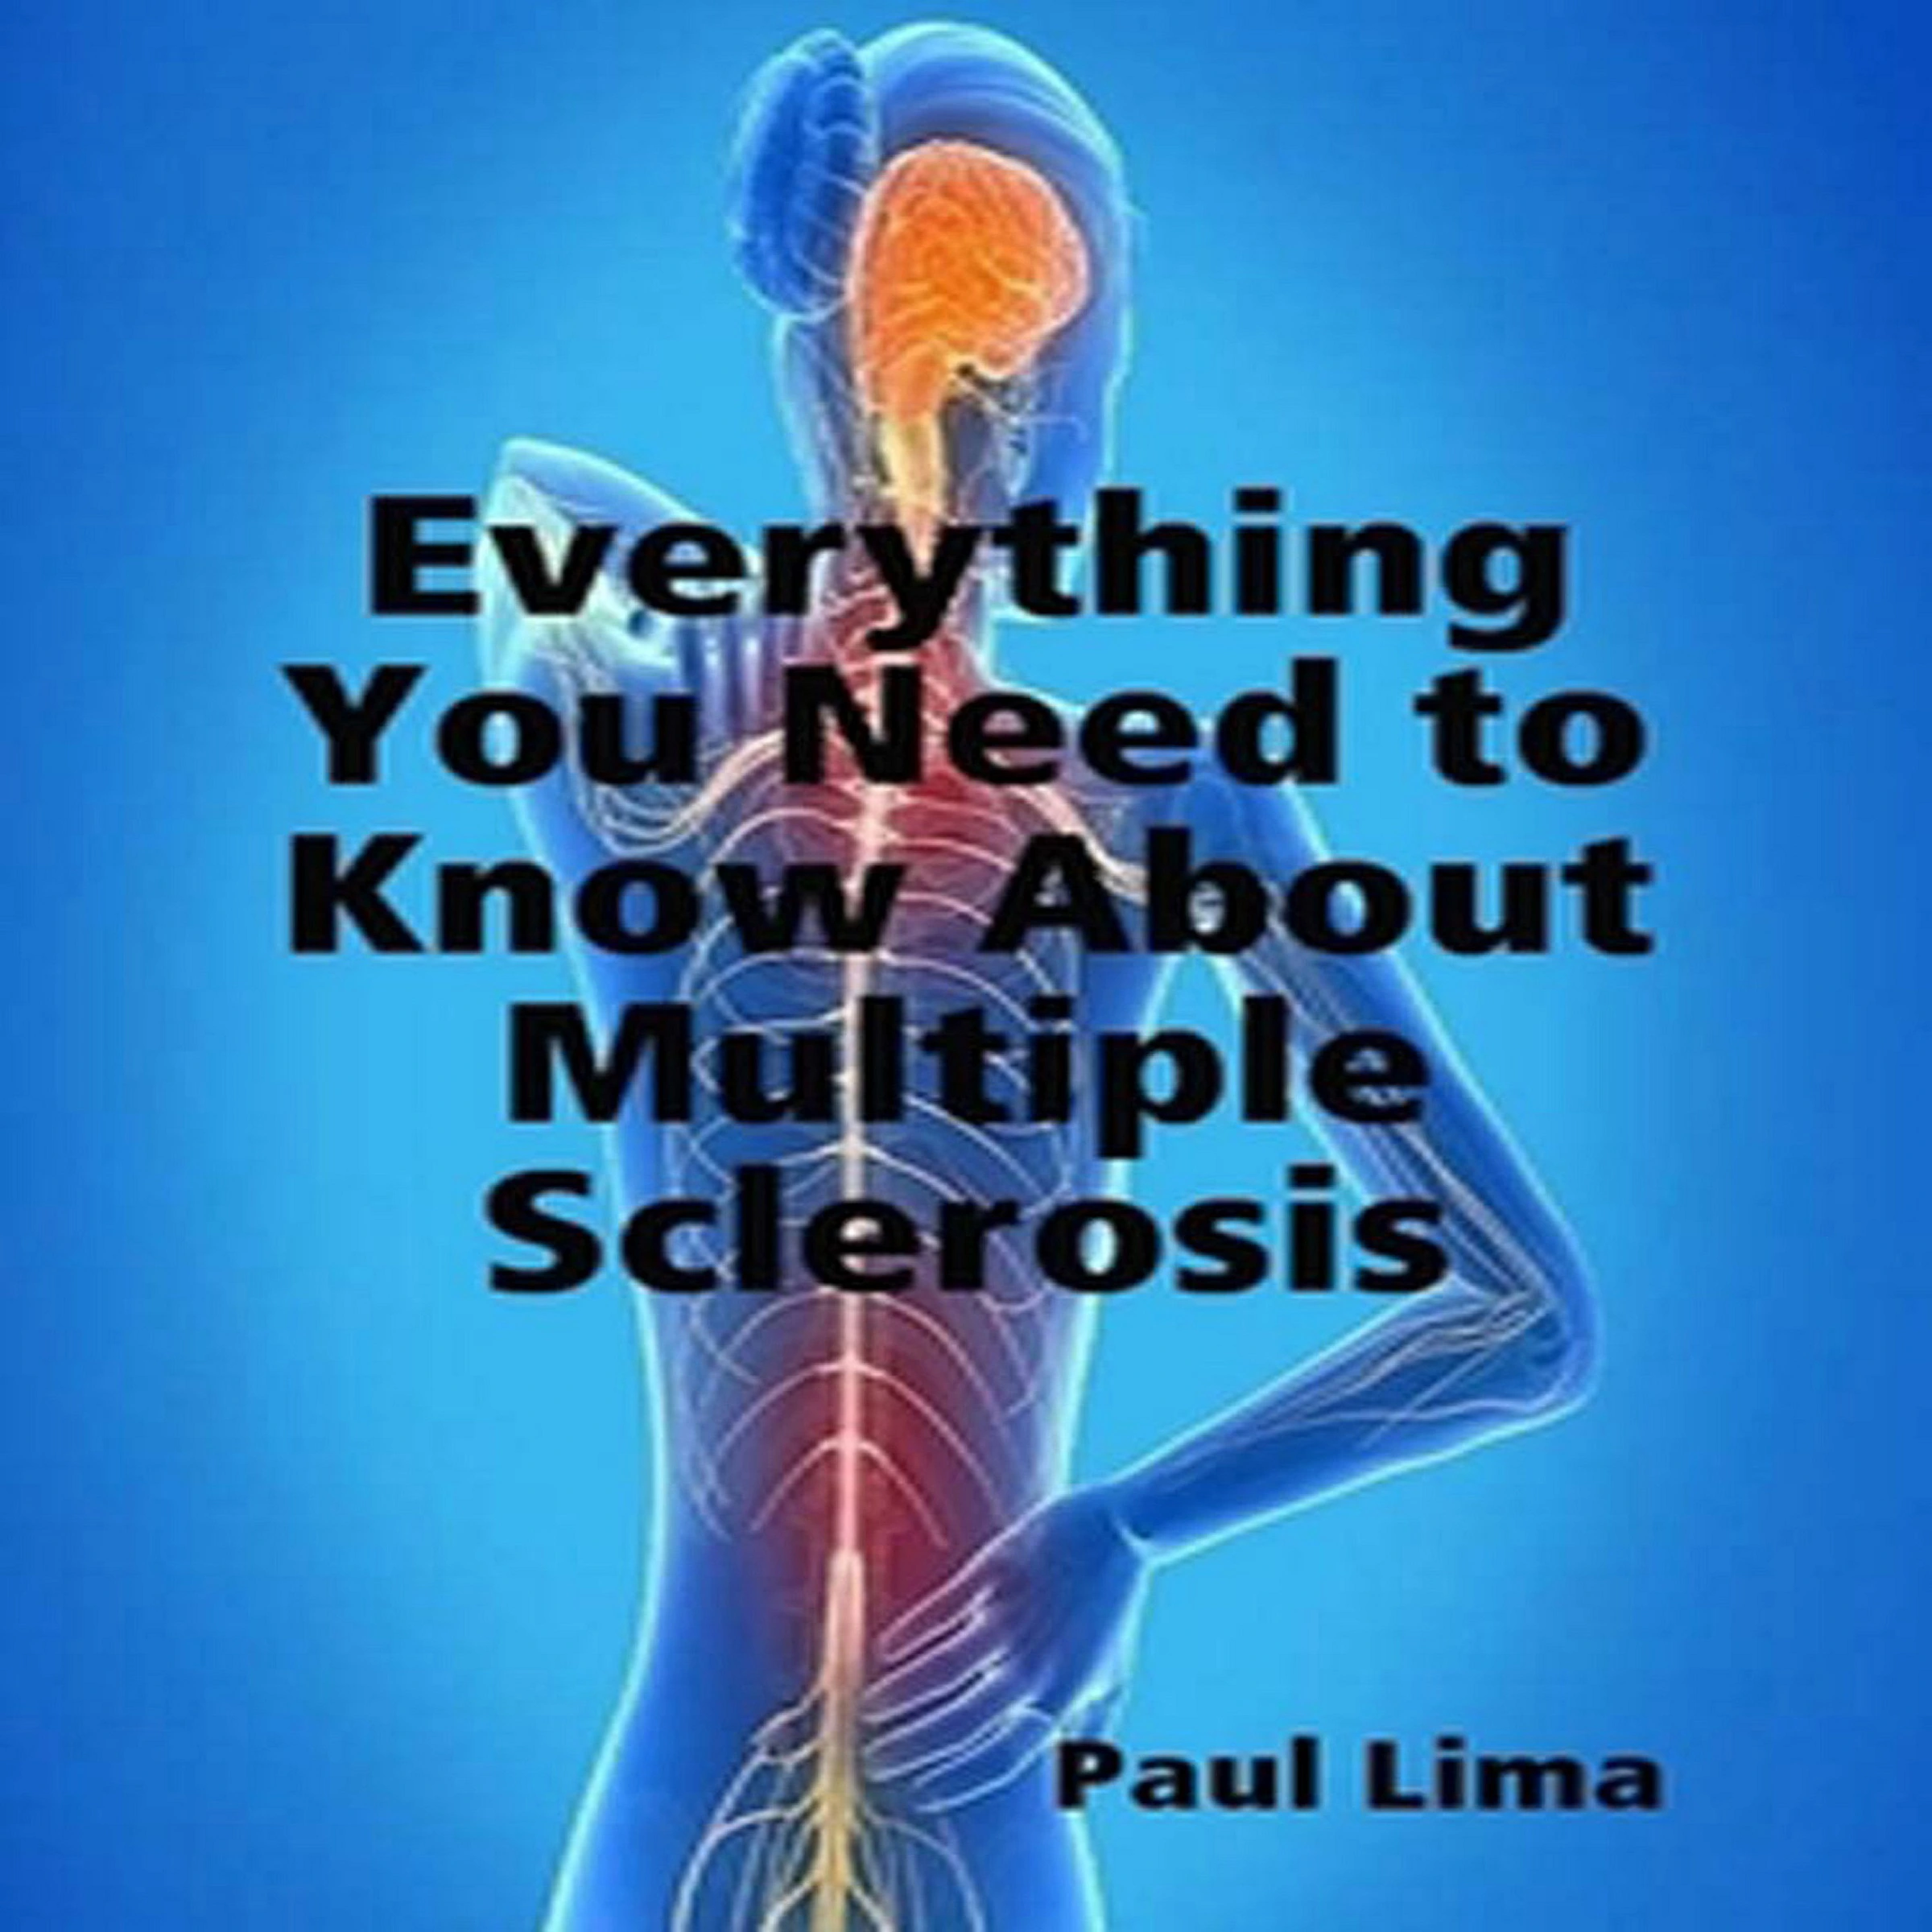 Everything You Need To Know About Multiple Sclerosis by Paul Lima Audiobook